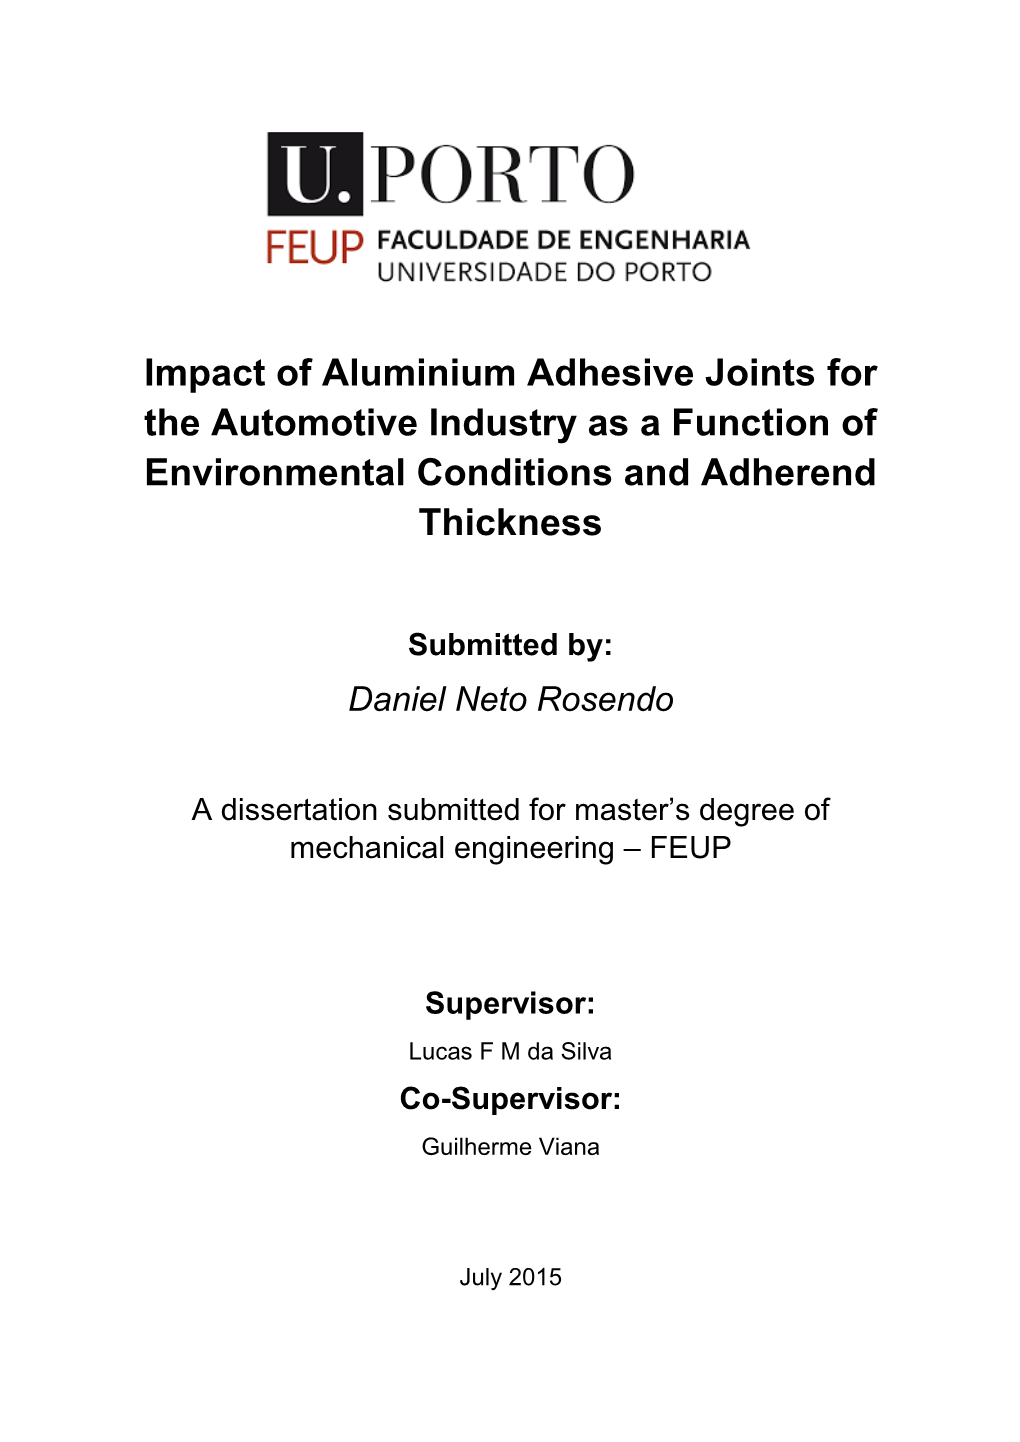 Impact of Aluminium Adhesive Joints for the Automotive Industry As a Function of Environmental Conditions and Adherend Thickness